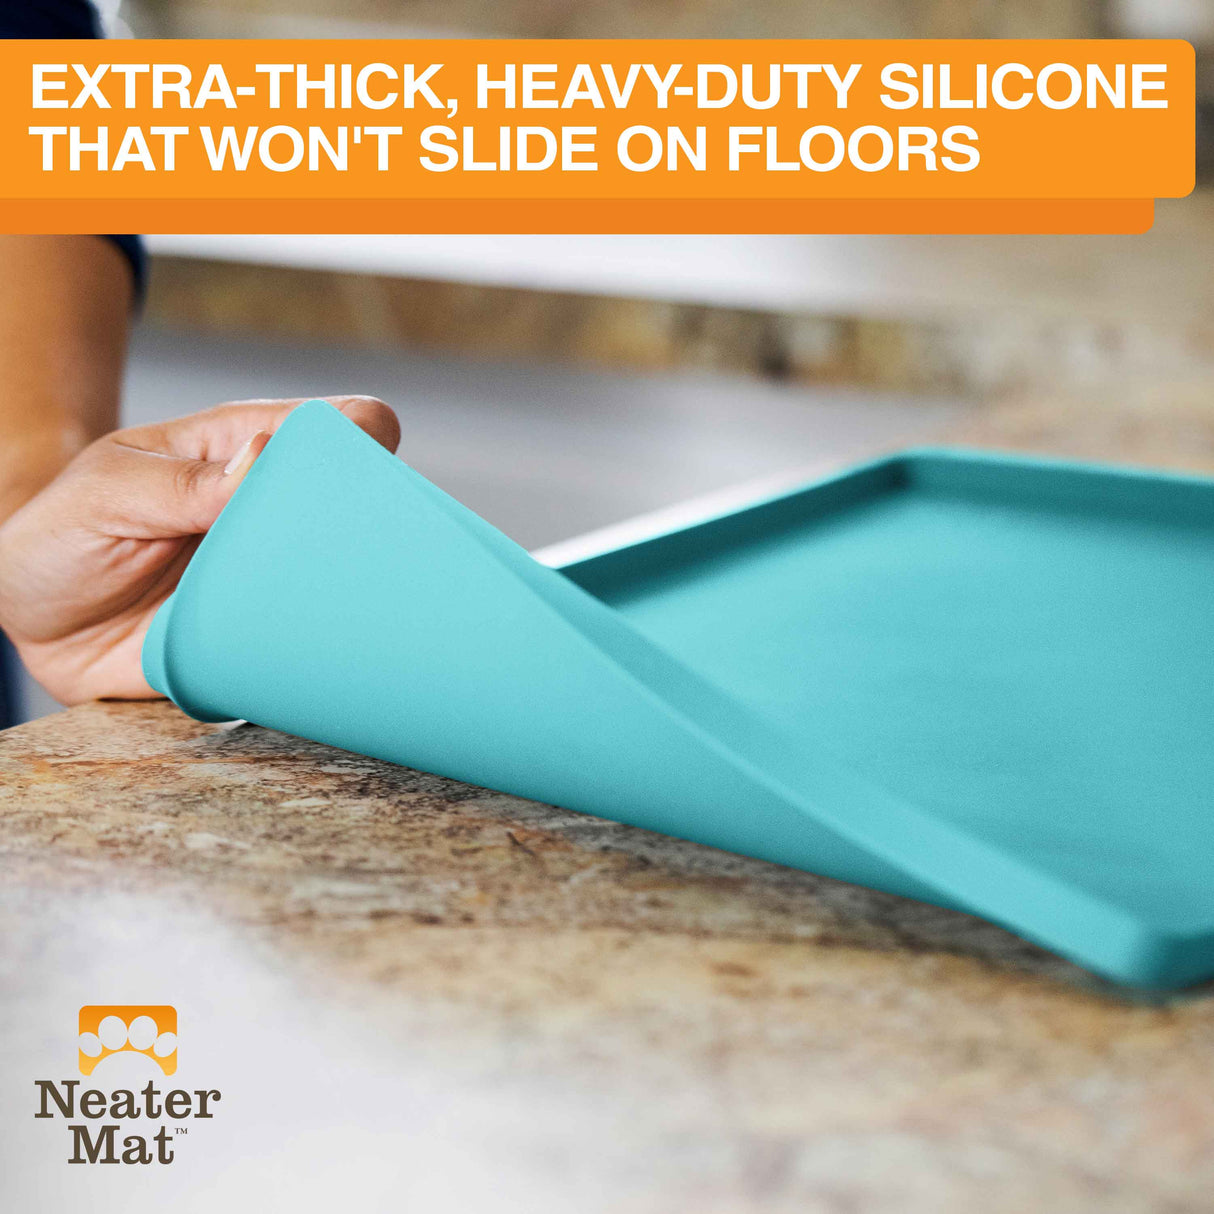 The bottom of the Neater Mat is non-slip which prevents it from sliding on floors